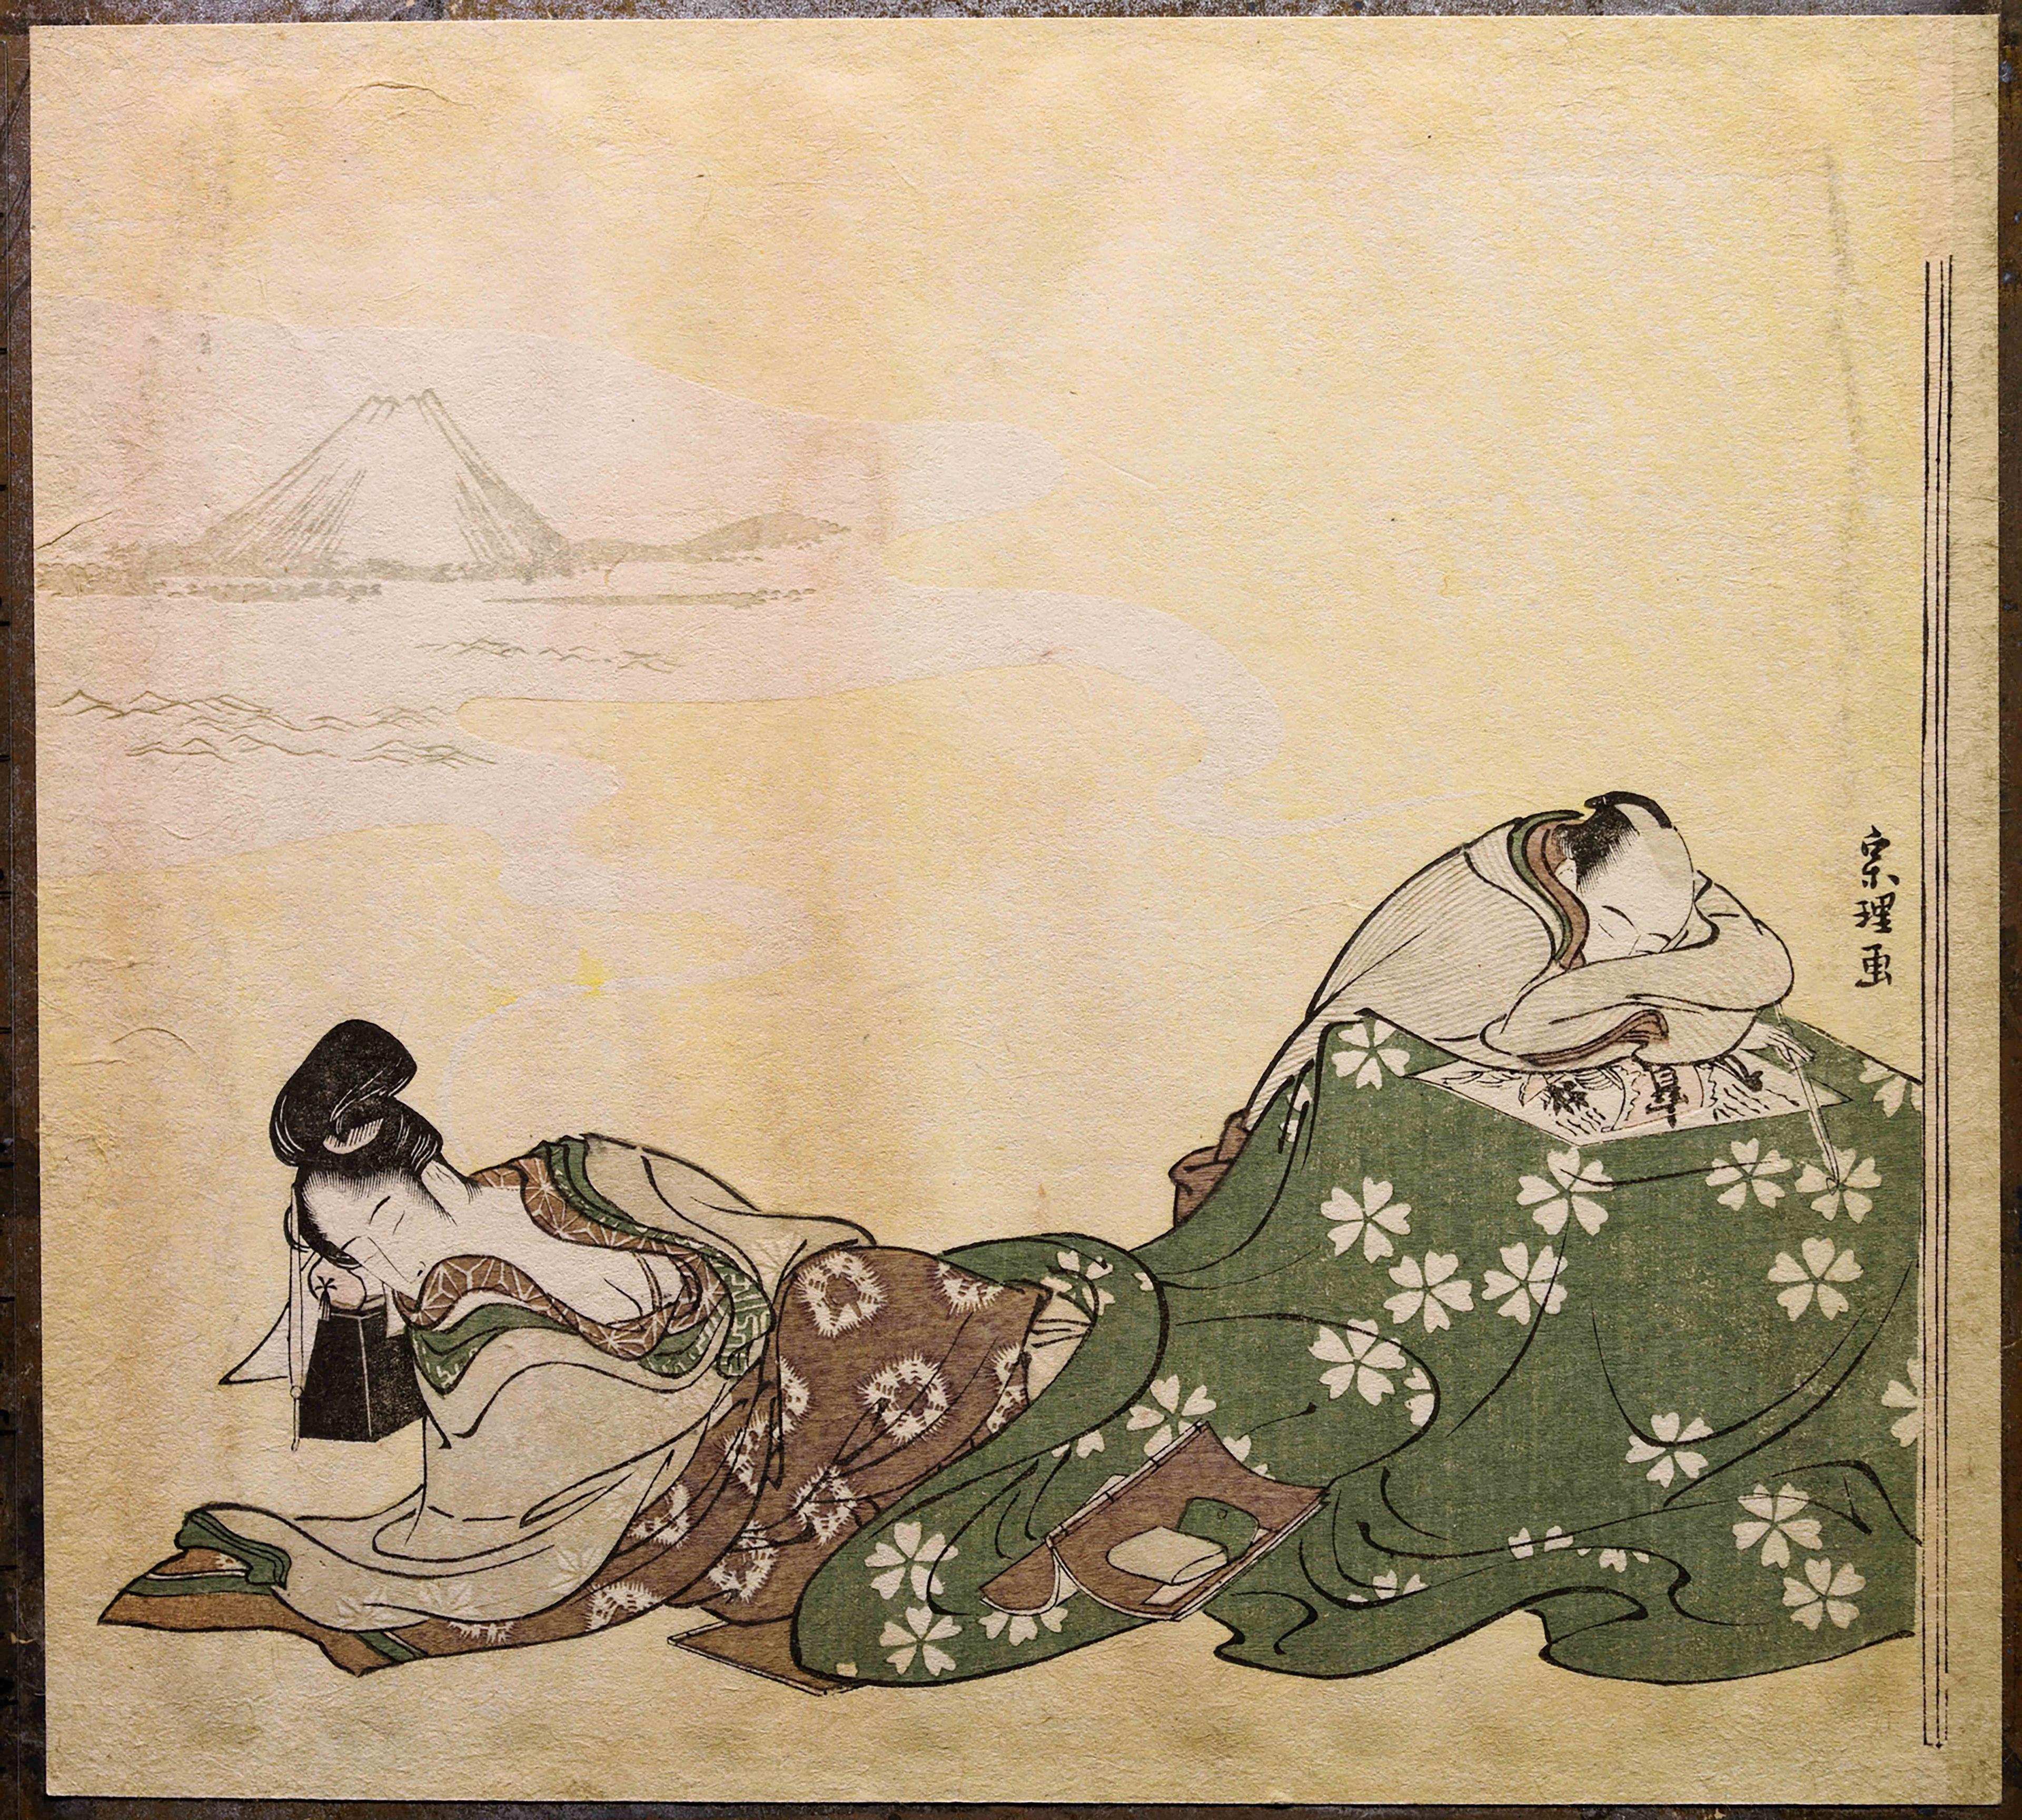 An illustration of two figures asleep on the ground, next to a small table. They're both draped in printed fabrics. Mount Fuji is faintly visible in the distance.